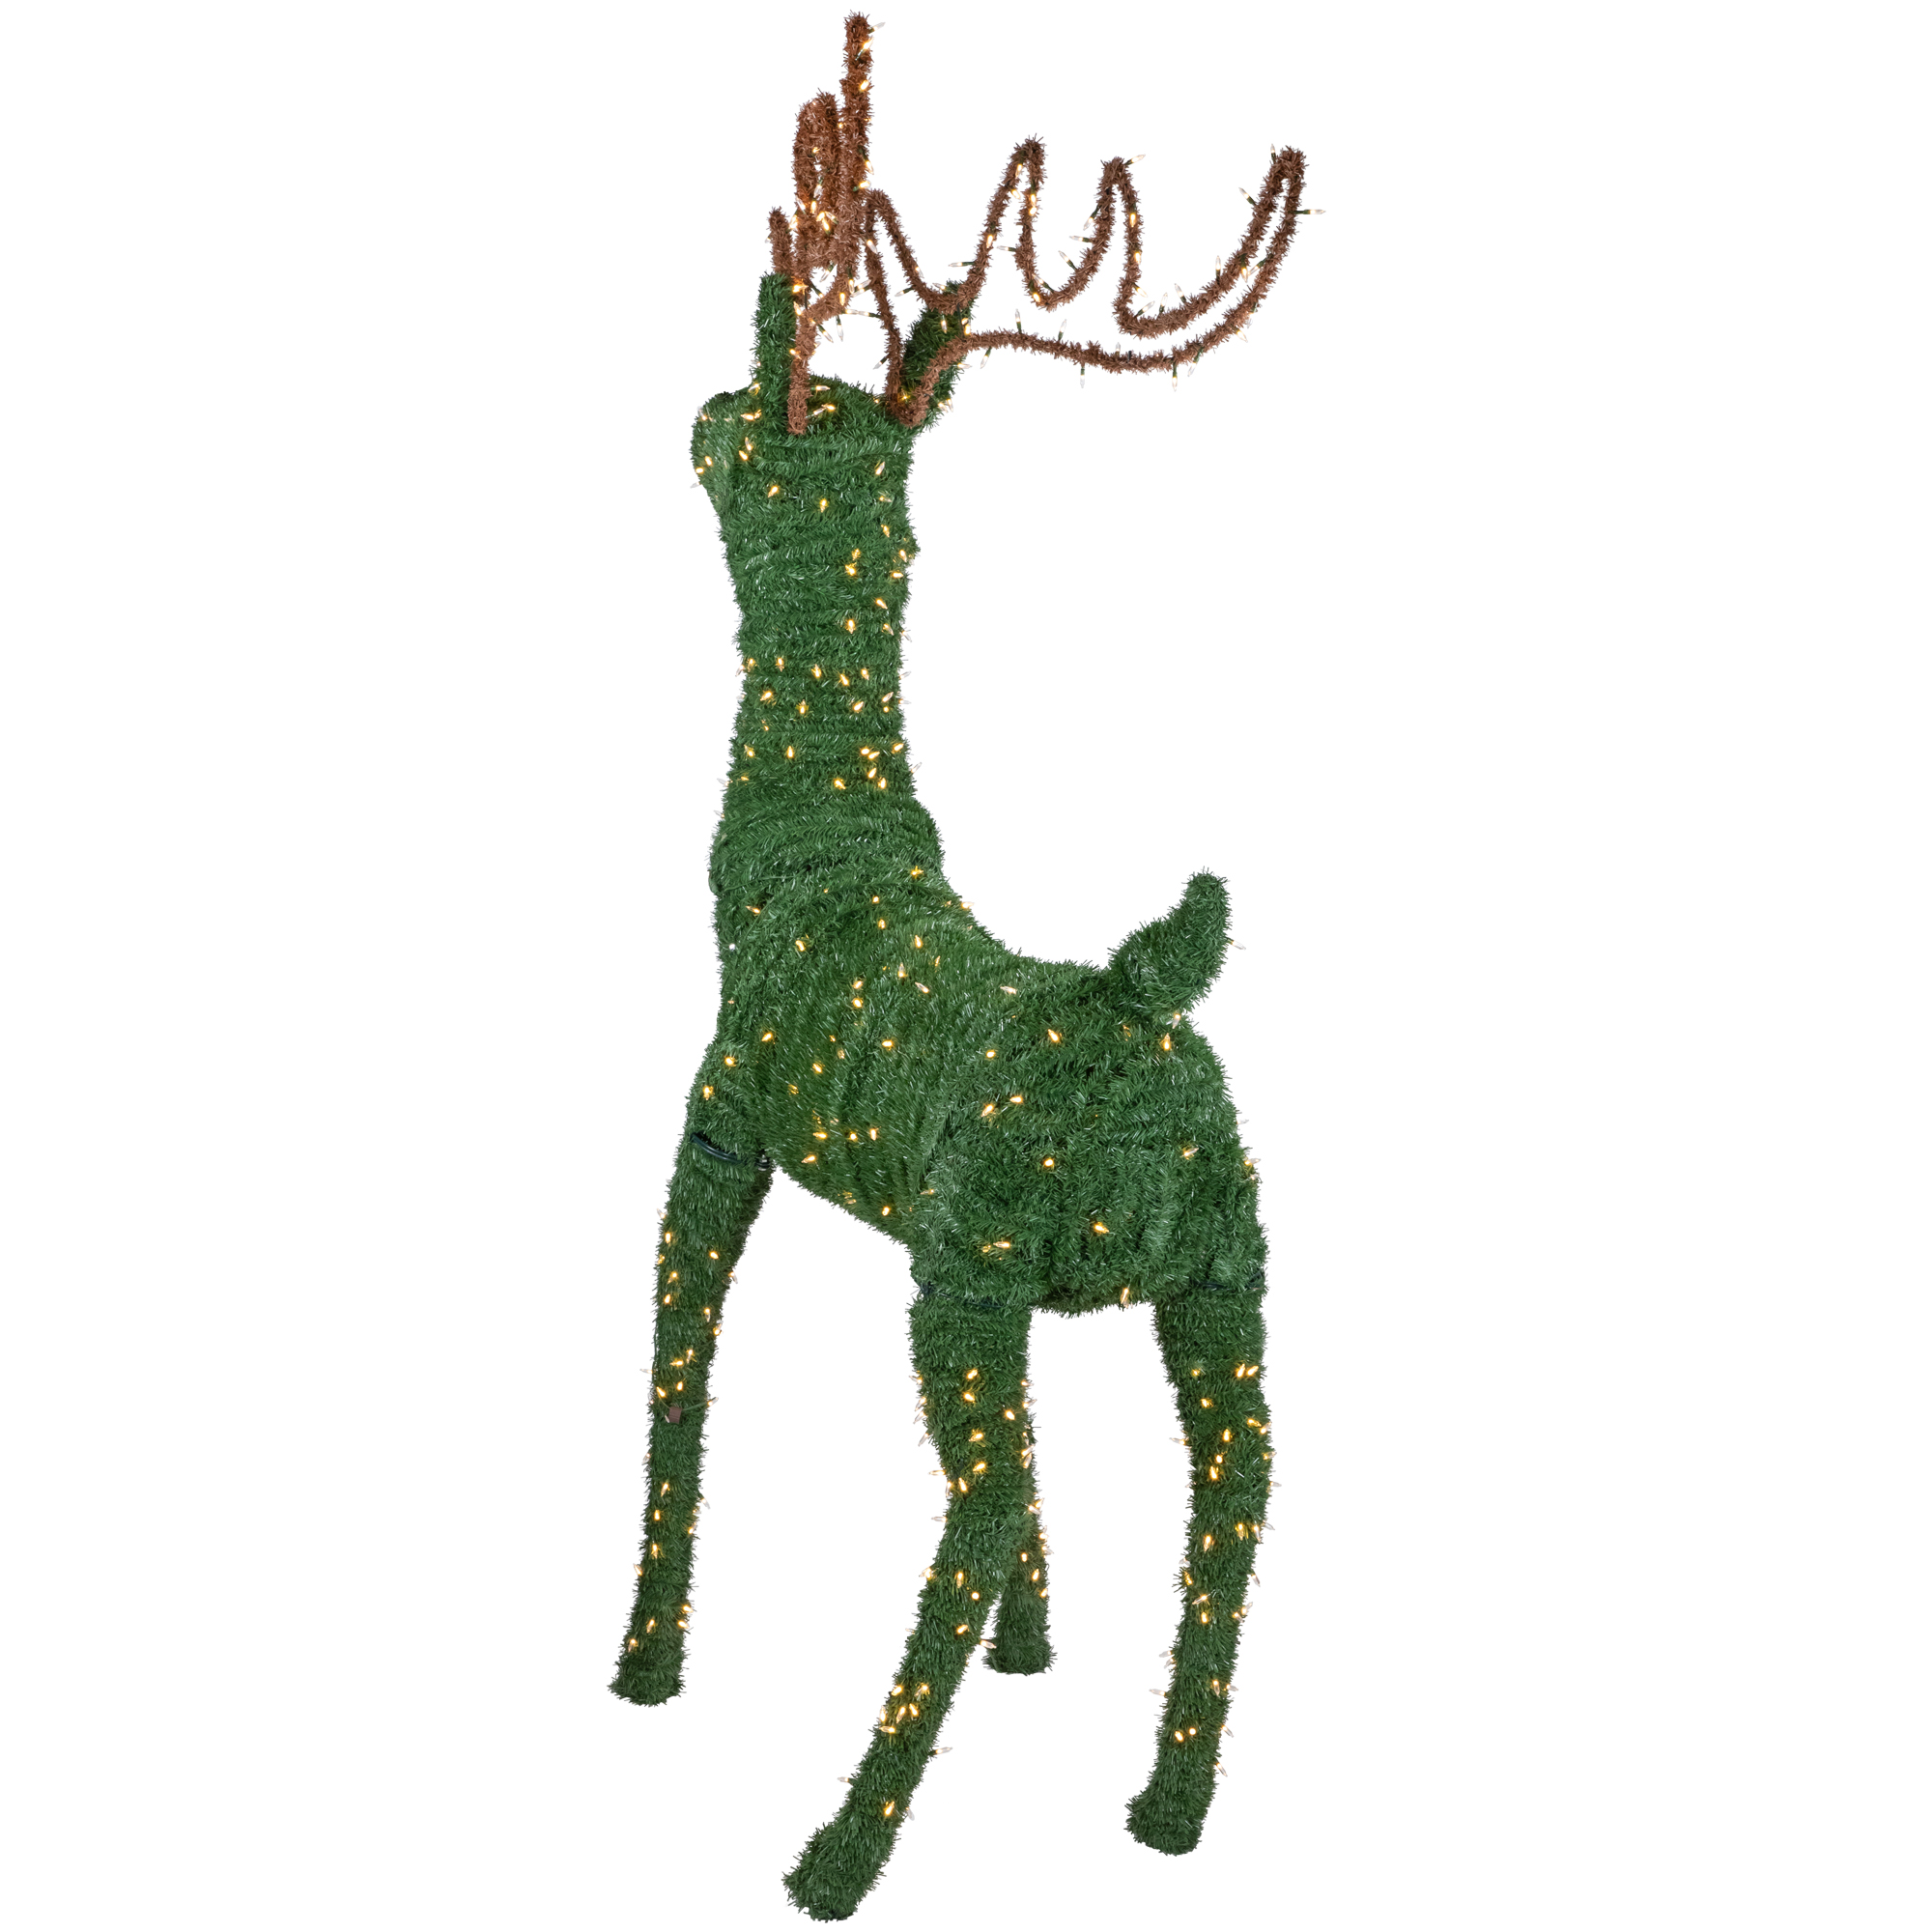 Northlight Lighted Commercial Standing Topiary Reindeer Outdoor Christmas Decoration - 6.5' - Warm White LED Lights